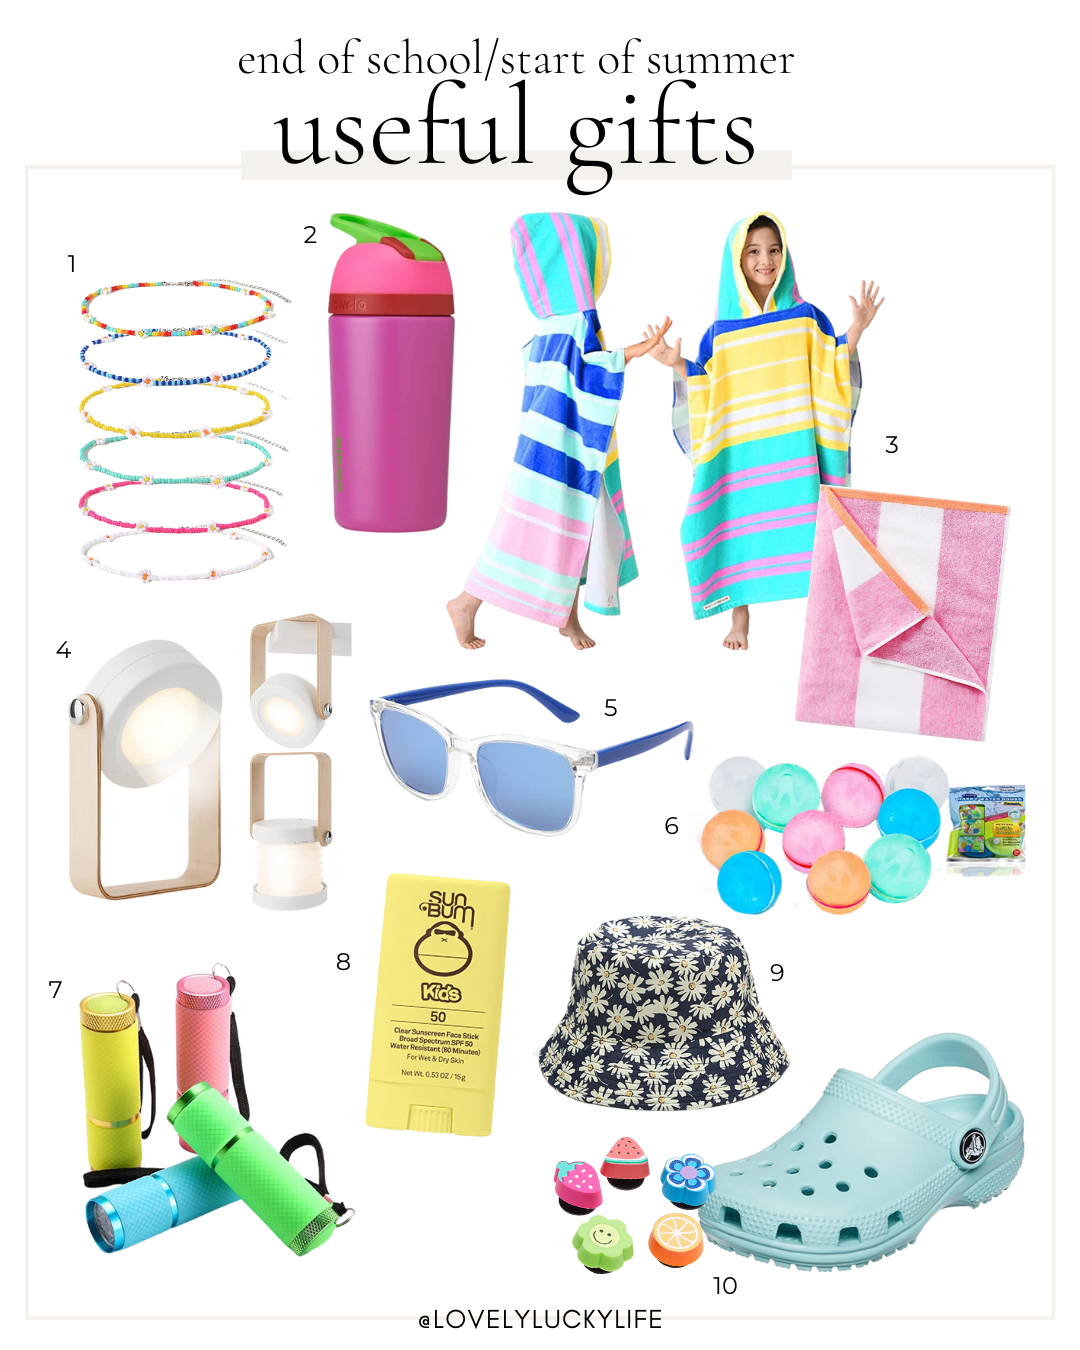 10 Practical End-of-School Gifts for Summer - Lovely Lucky Life